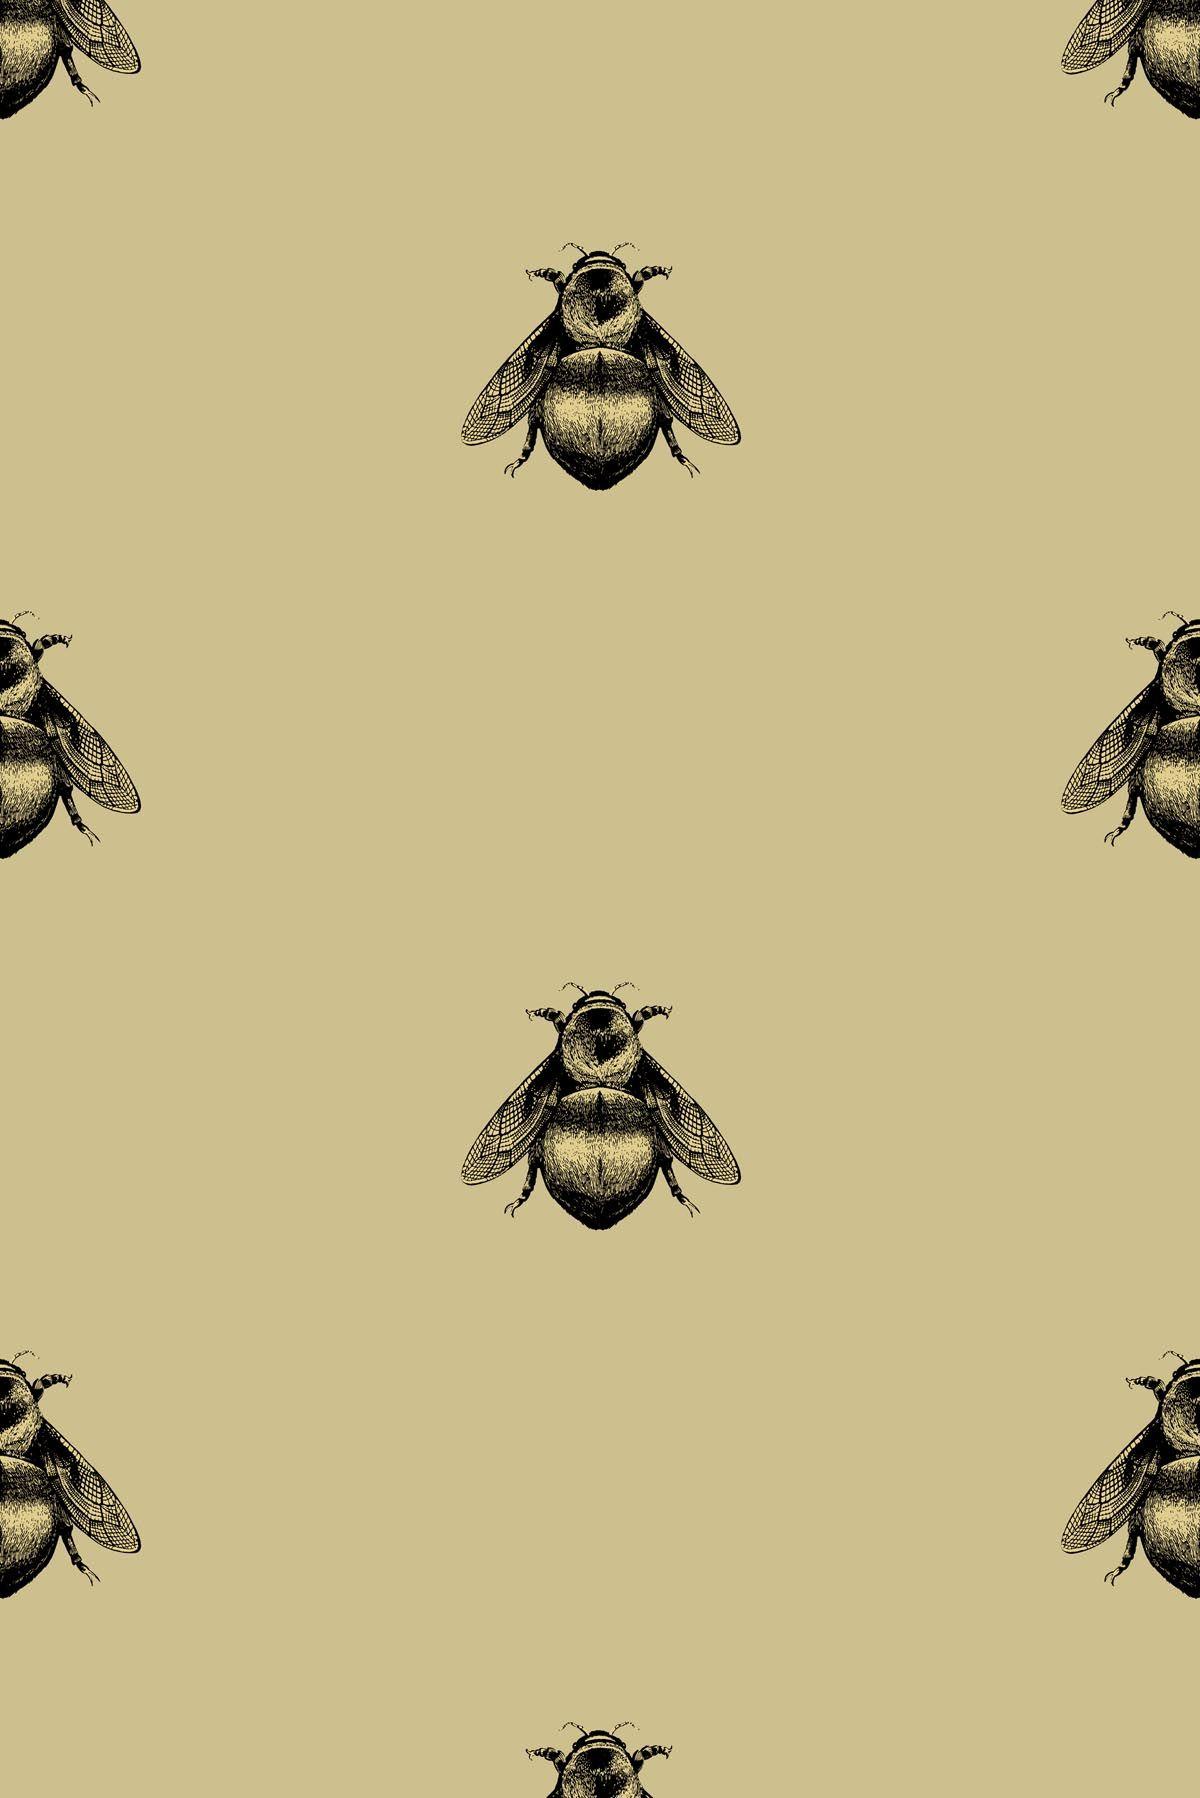 Im A Bee wallpaper Collection